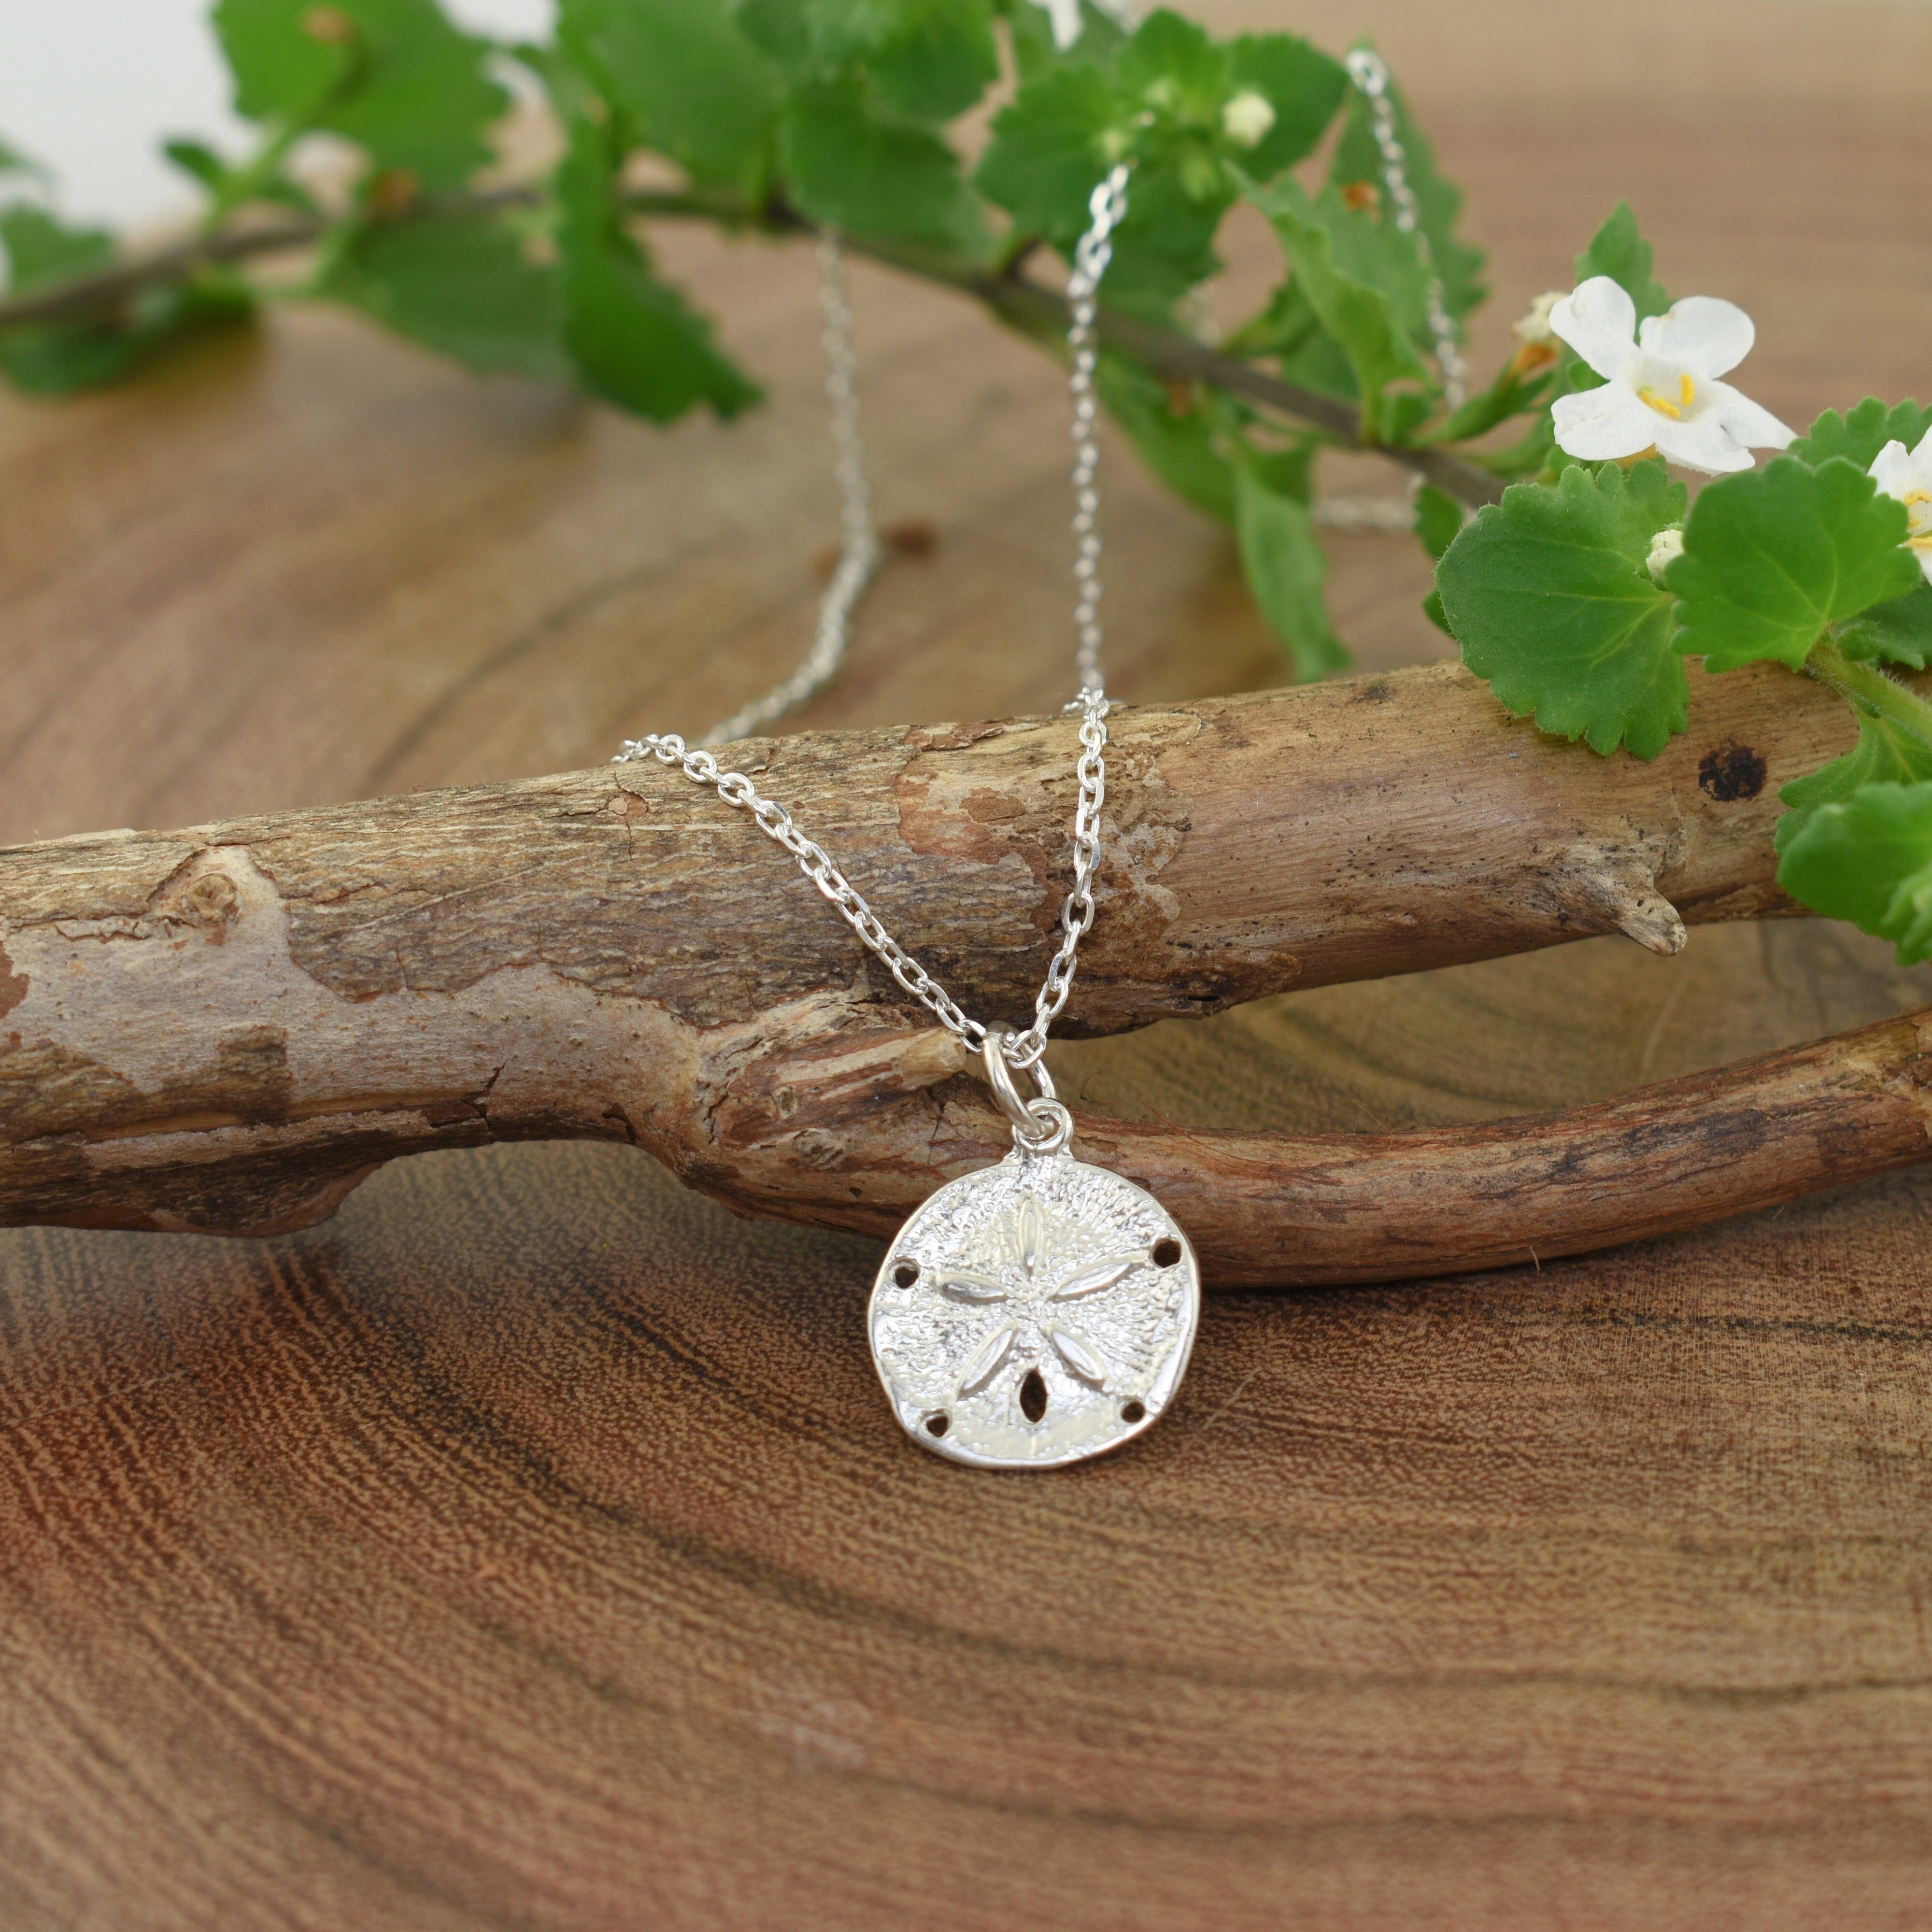 .925 sterling silver sand dollar necklace